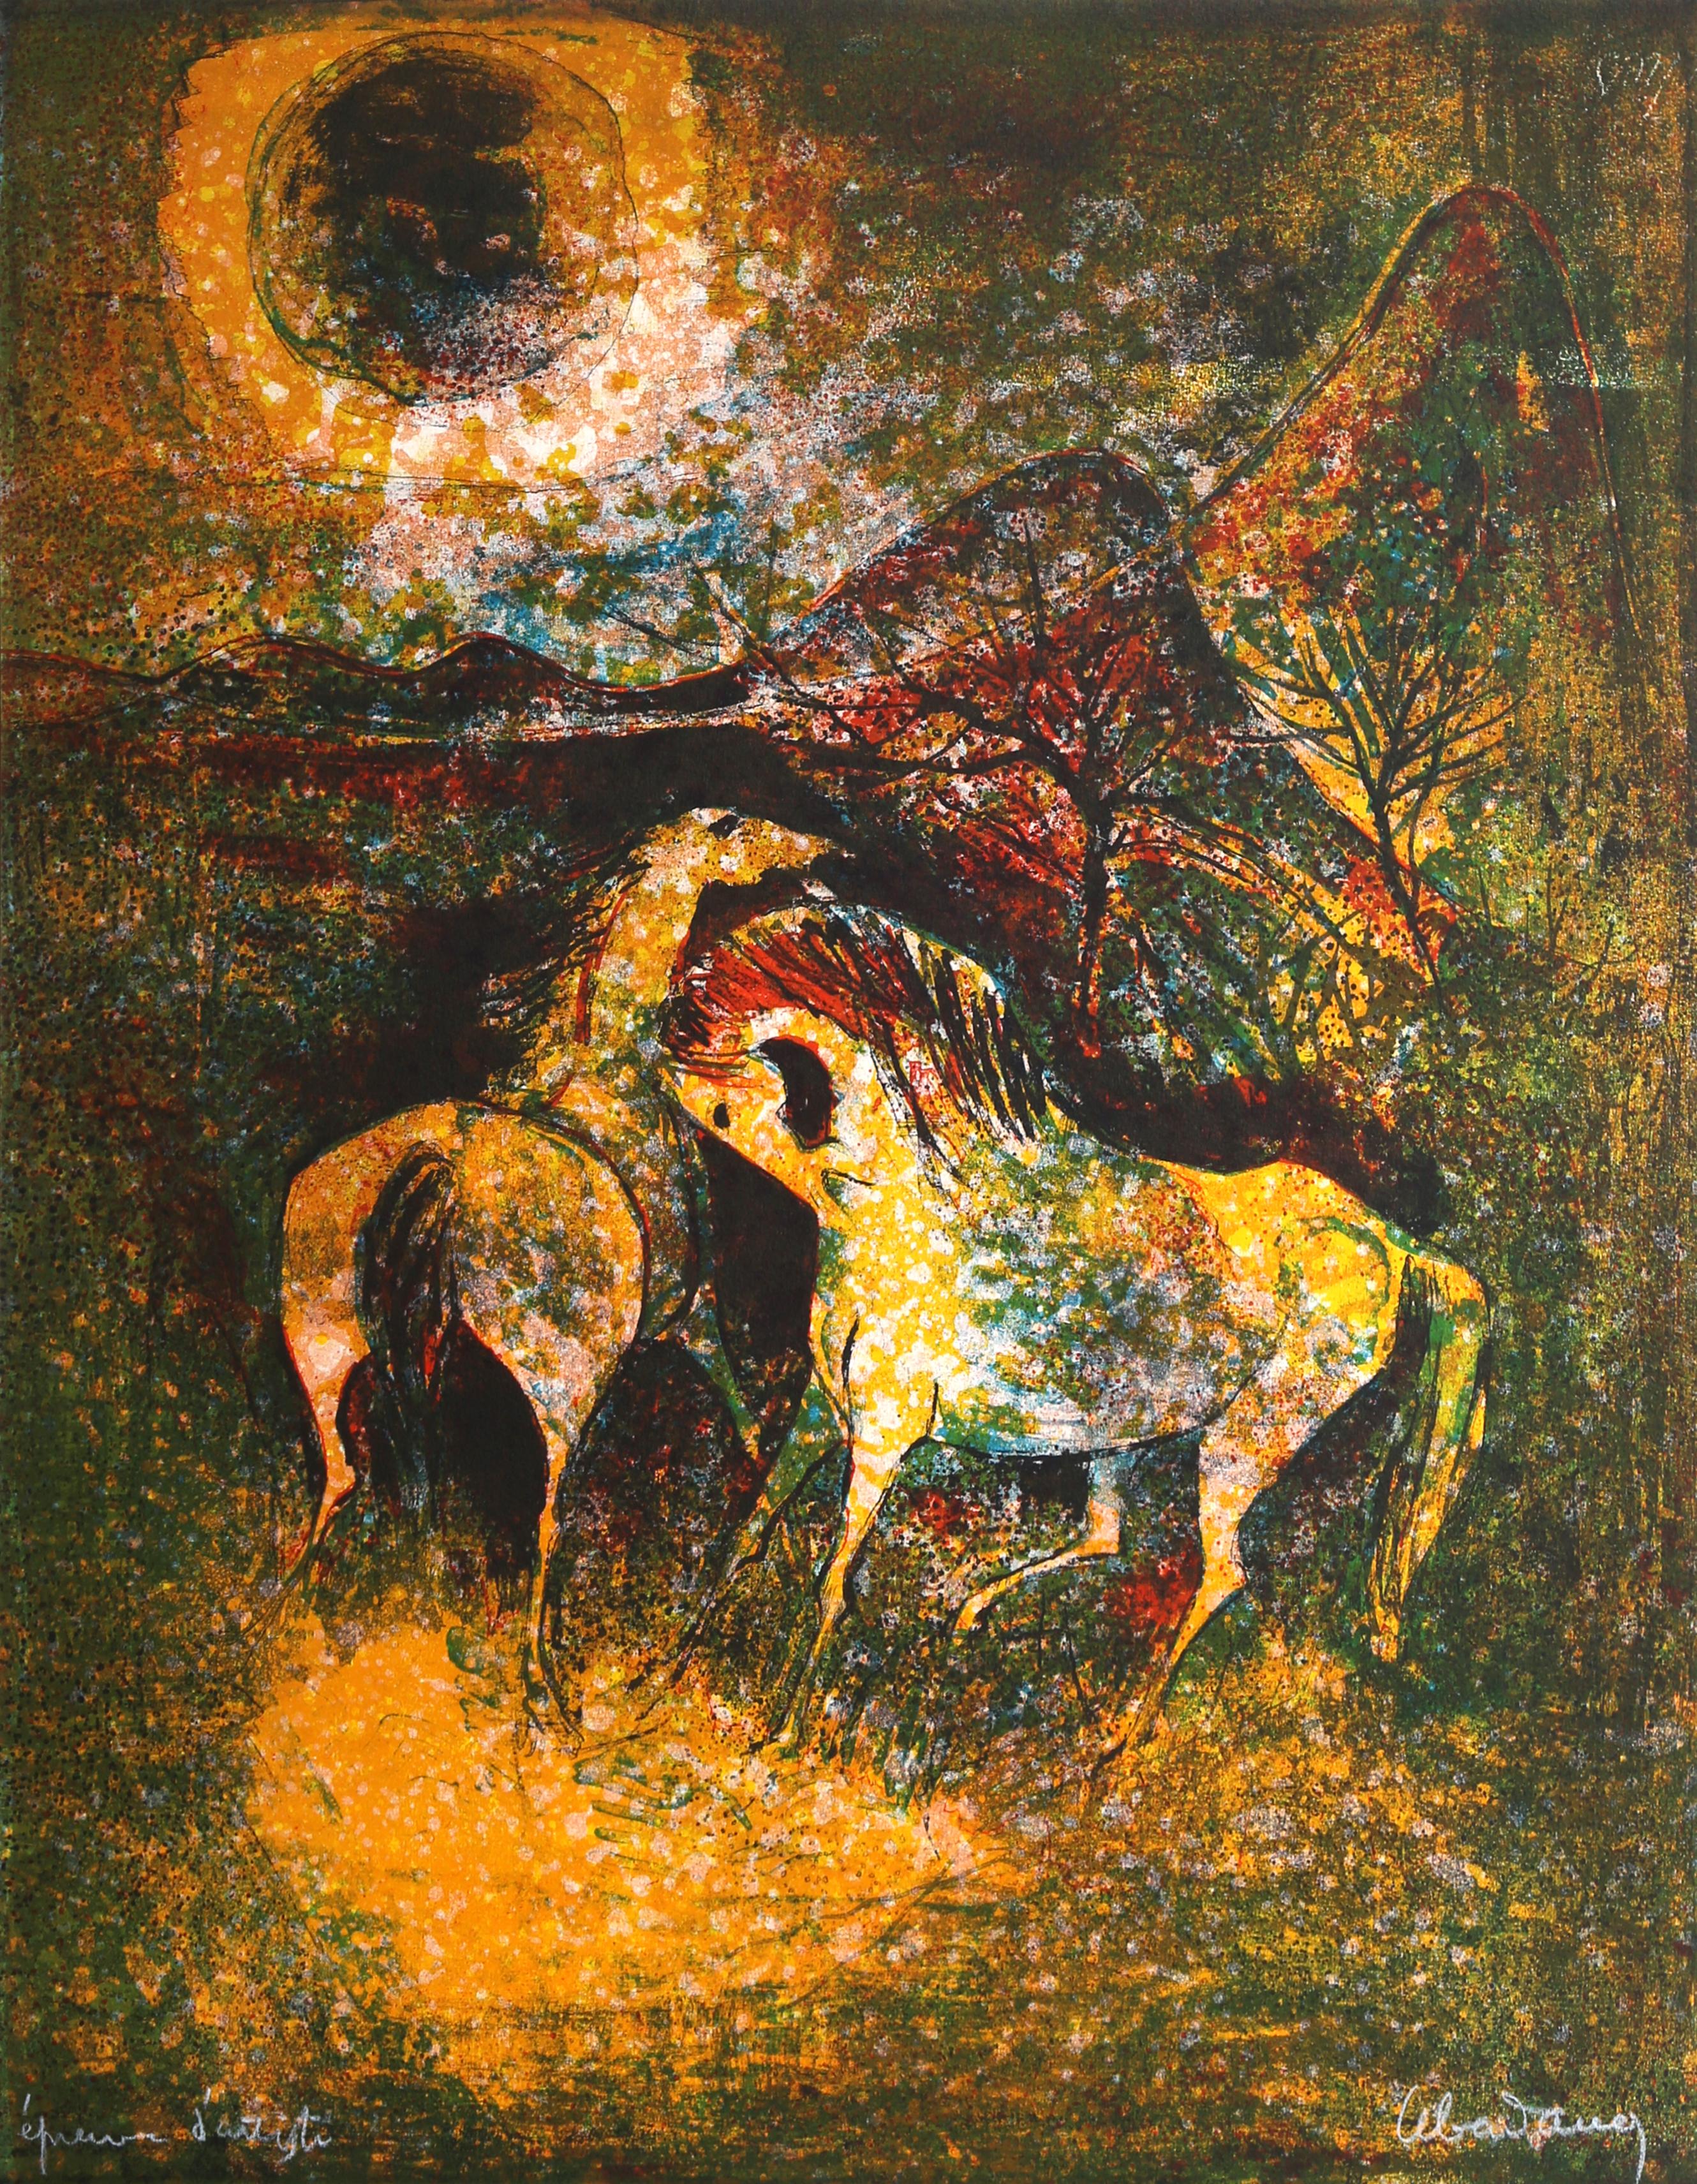 Hoi Lebadang Landscape Print - Horses in the Moonlight, Lithograph by Lebadang